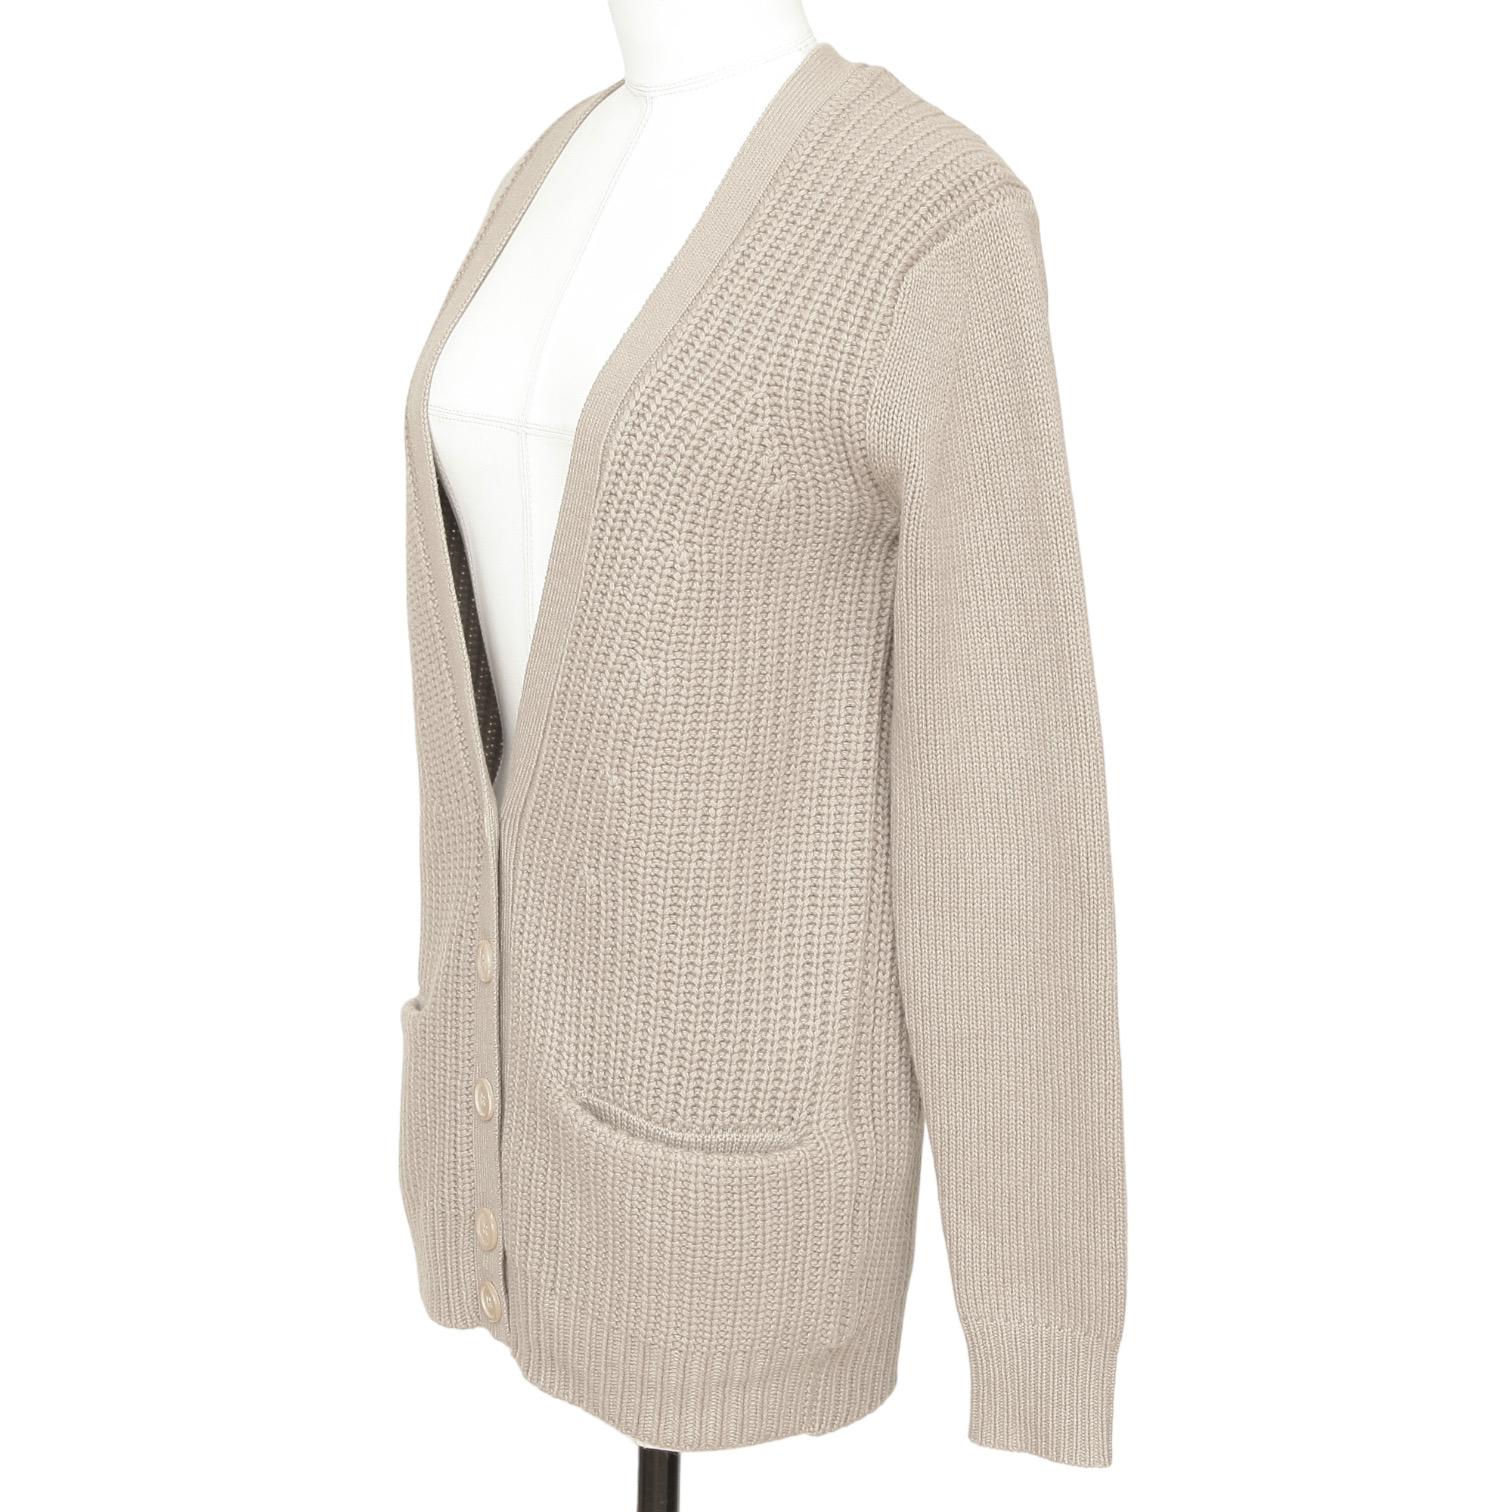 CHLOE Cardigan Sweater Long Sleeve Beige Knit Buttons Pockets Sz XS 2011 $895 In Excellent Condition For Sale In Hollywood, FL